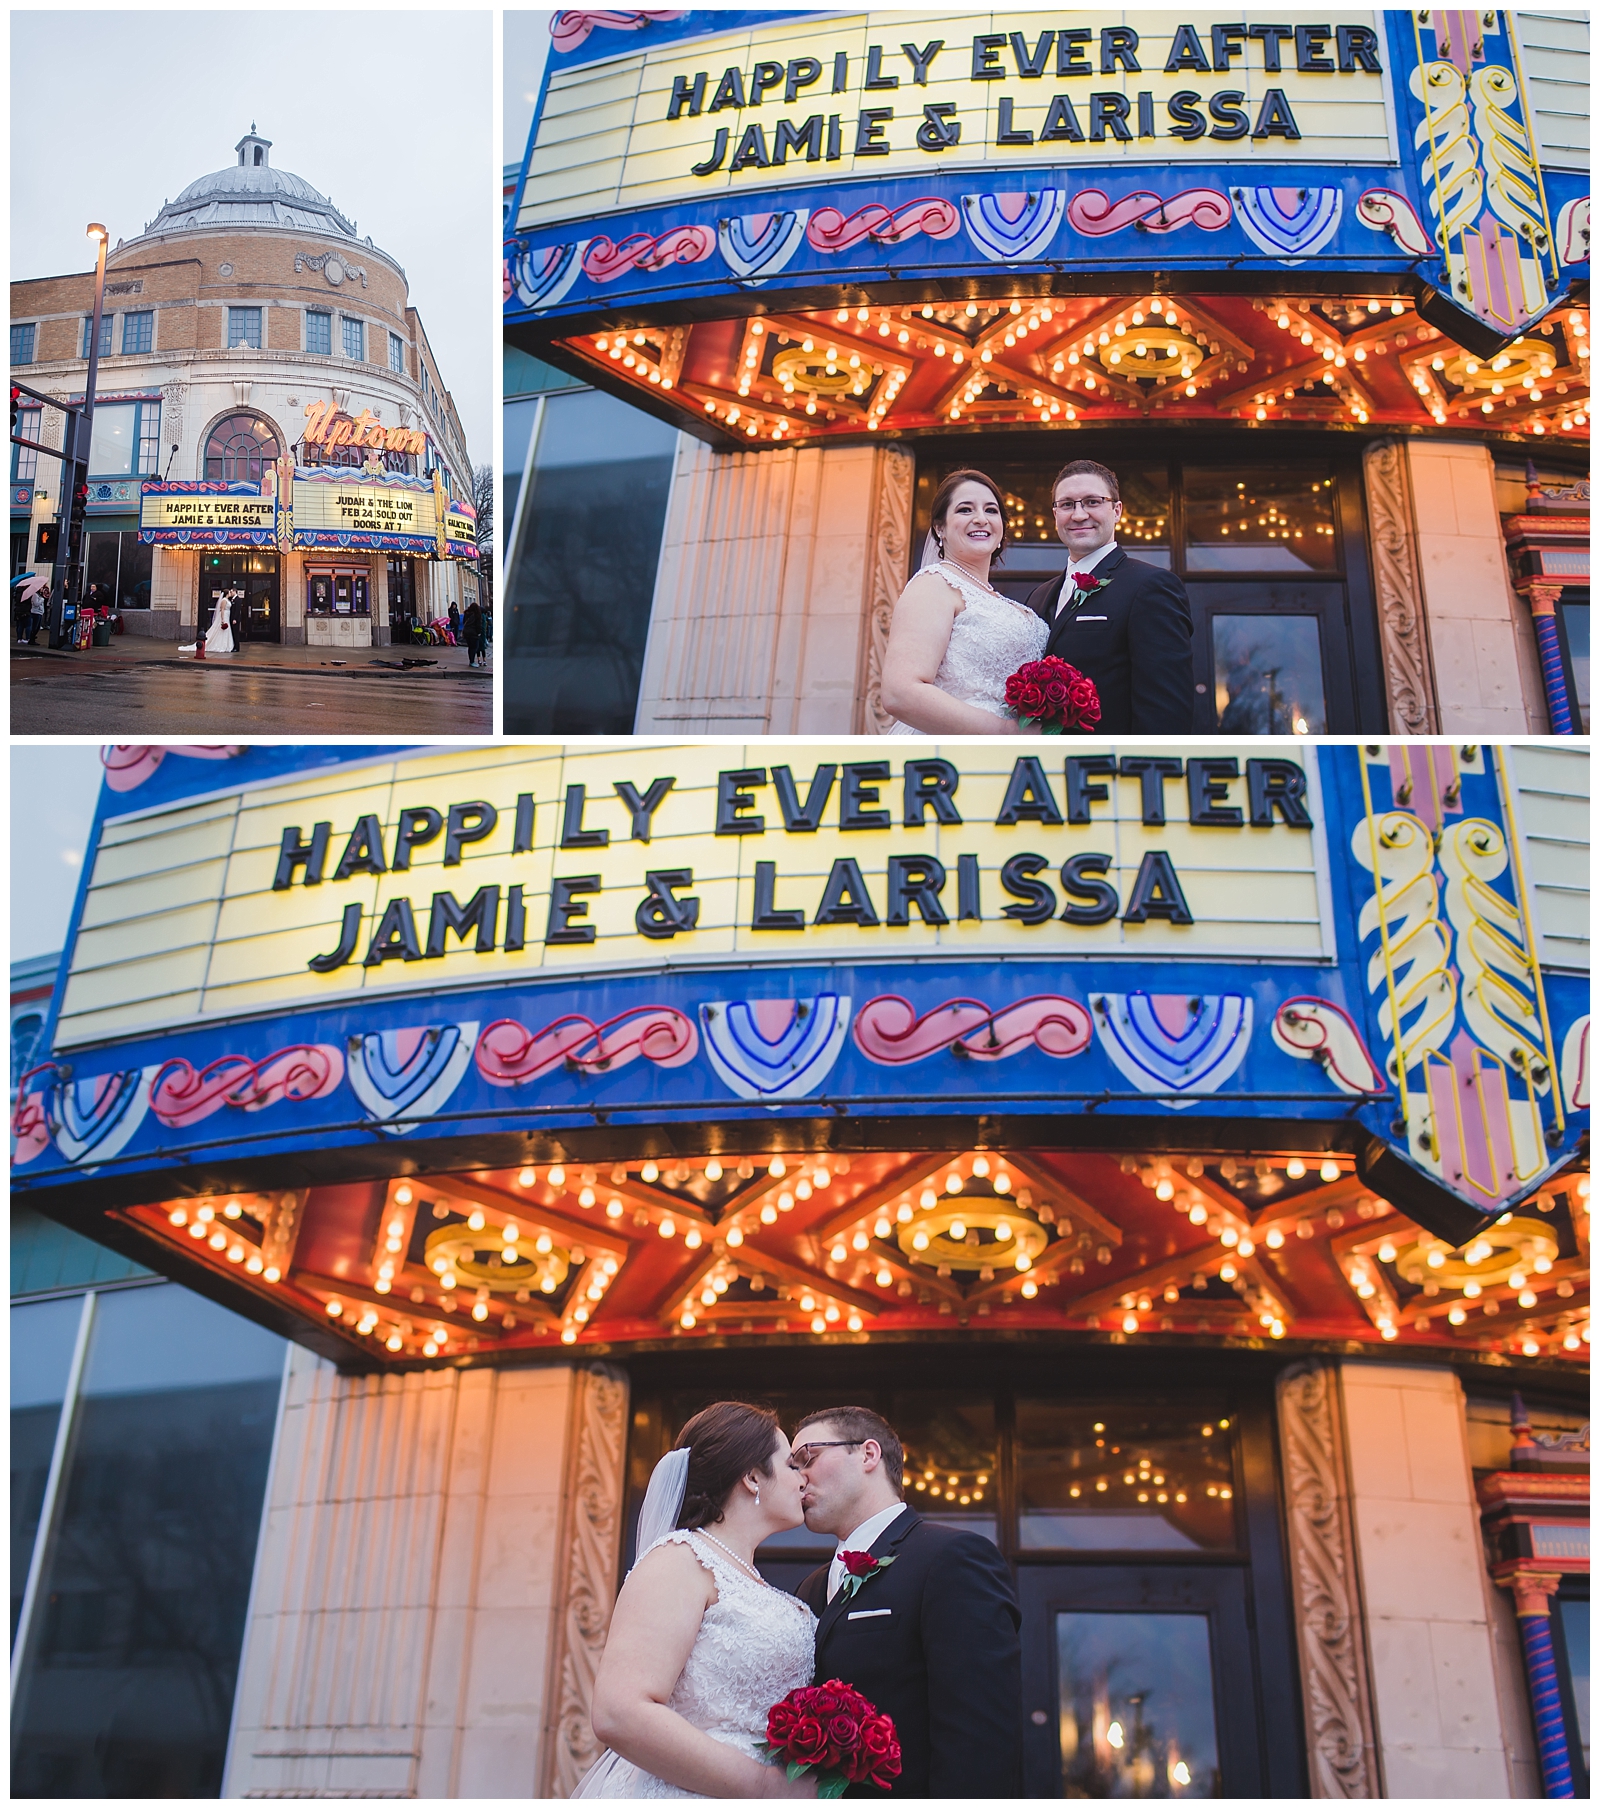 Wedding photography at Uptown Theater in Kansas City by Kansas City wedding photographers Wisdom-Watson Weddings.